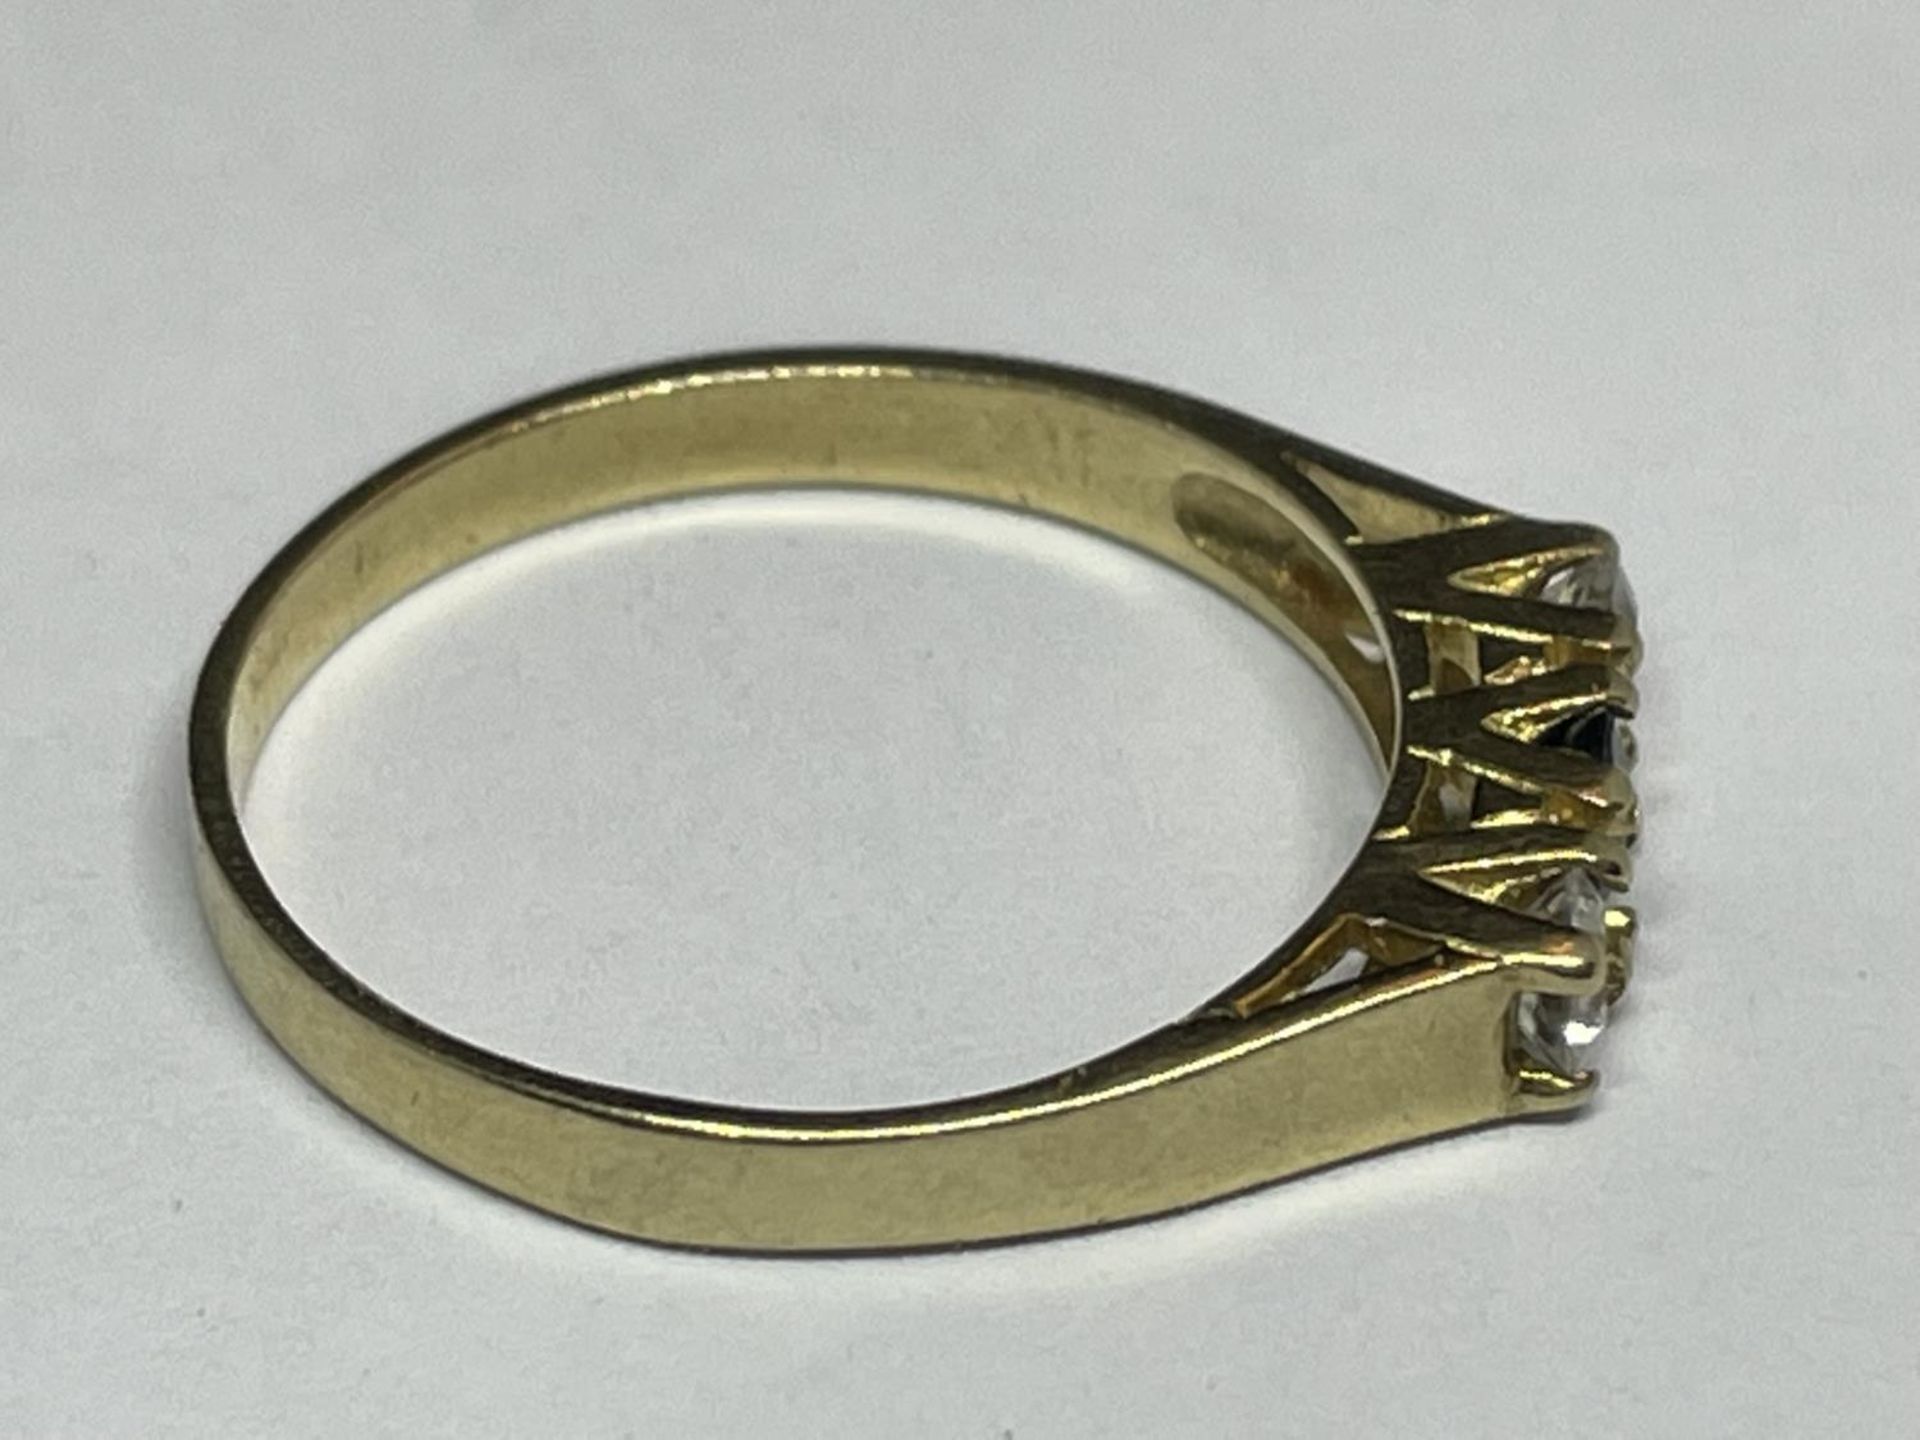 A 9 CARAT GOLD RING WITH THREE IN LINE STONES TO INCLUDE A CENTRE SAPPHIRE AND TWO CUBIC ZIRCONIAS - Image 6 of 8